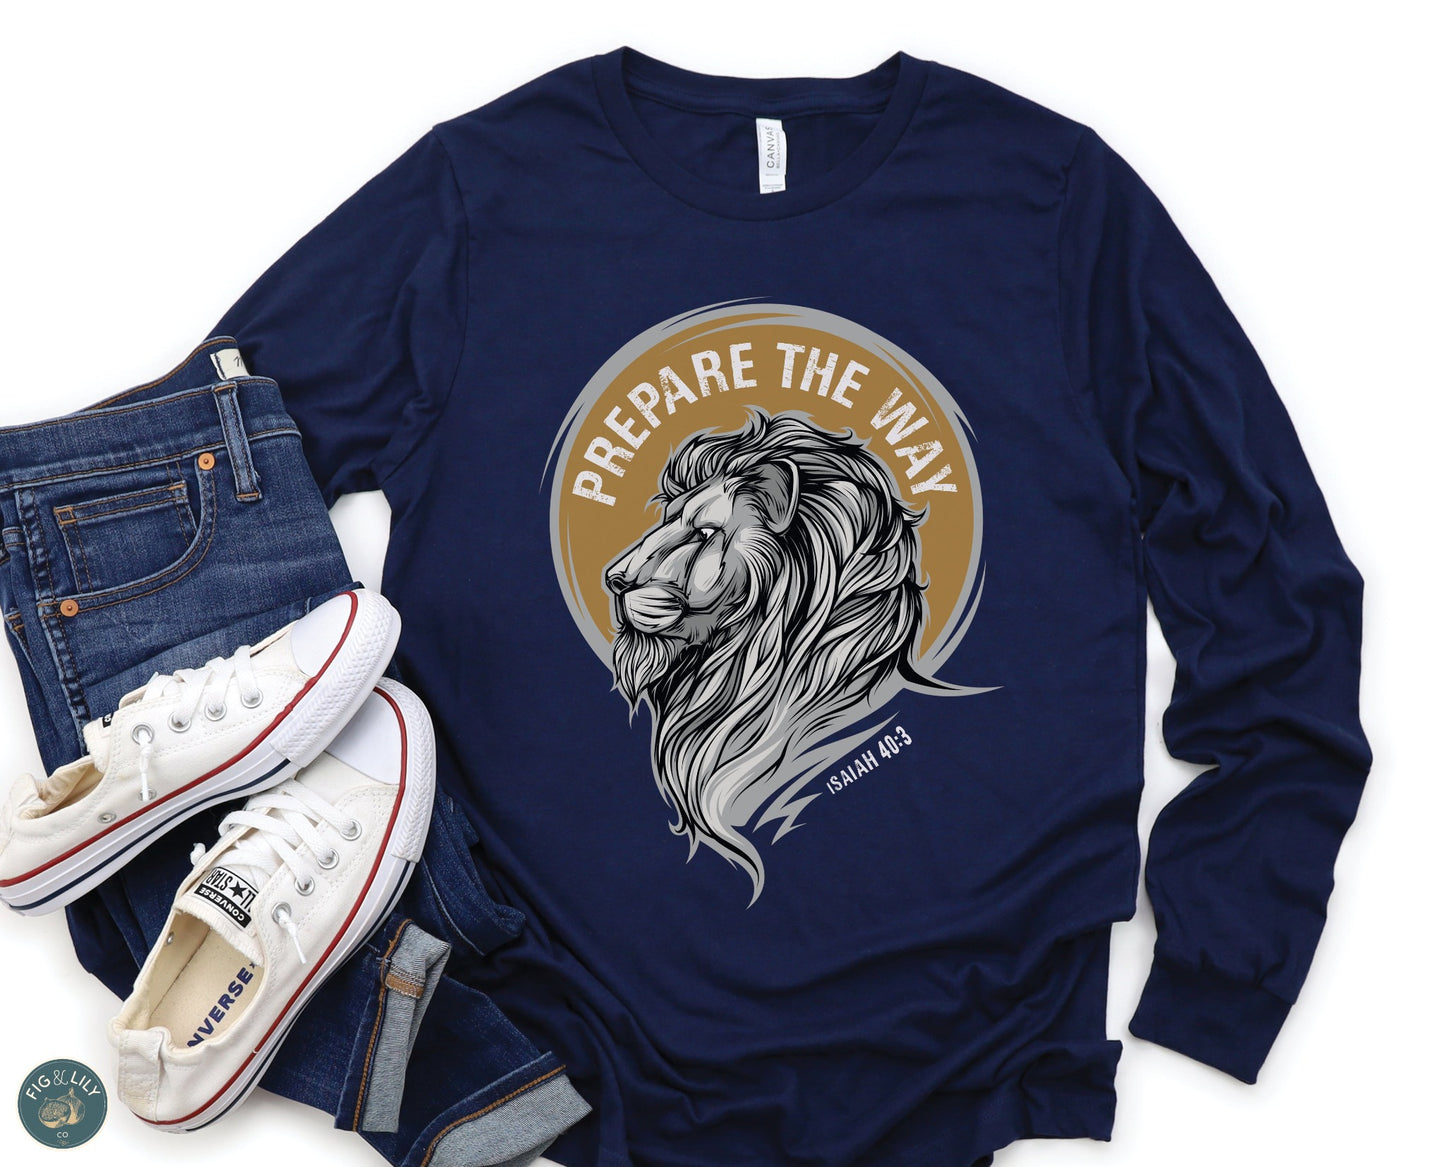 Lion of Judah Prepare the Way Isaiah 40:3 Christian aesthetic design printed in white and gold on soft navy blue long sleeve tee for men & women